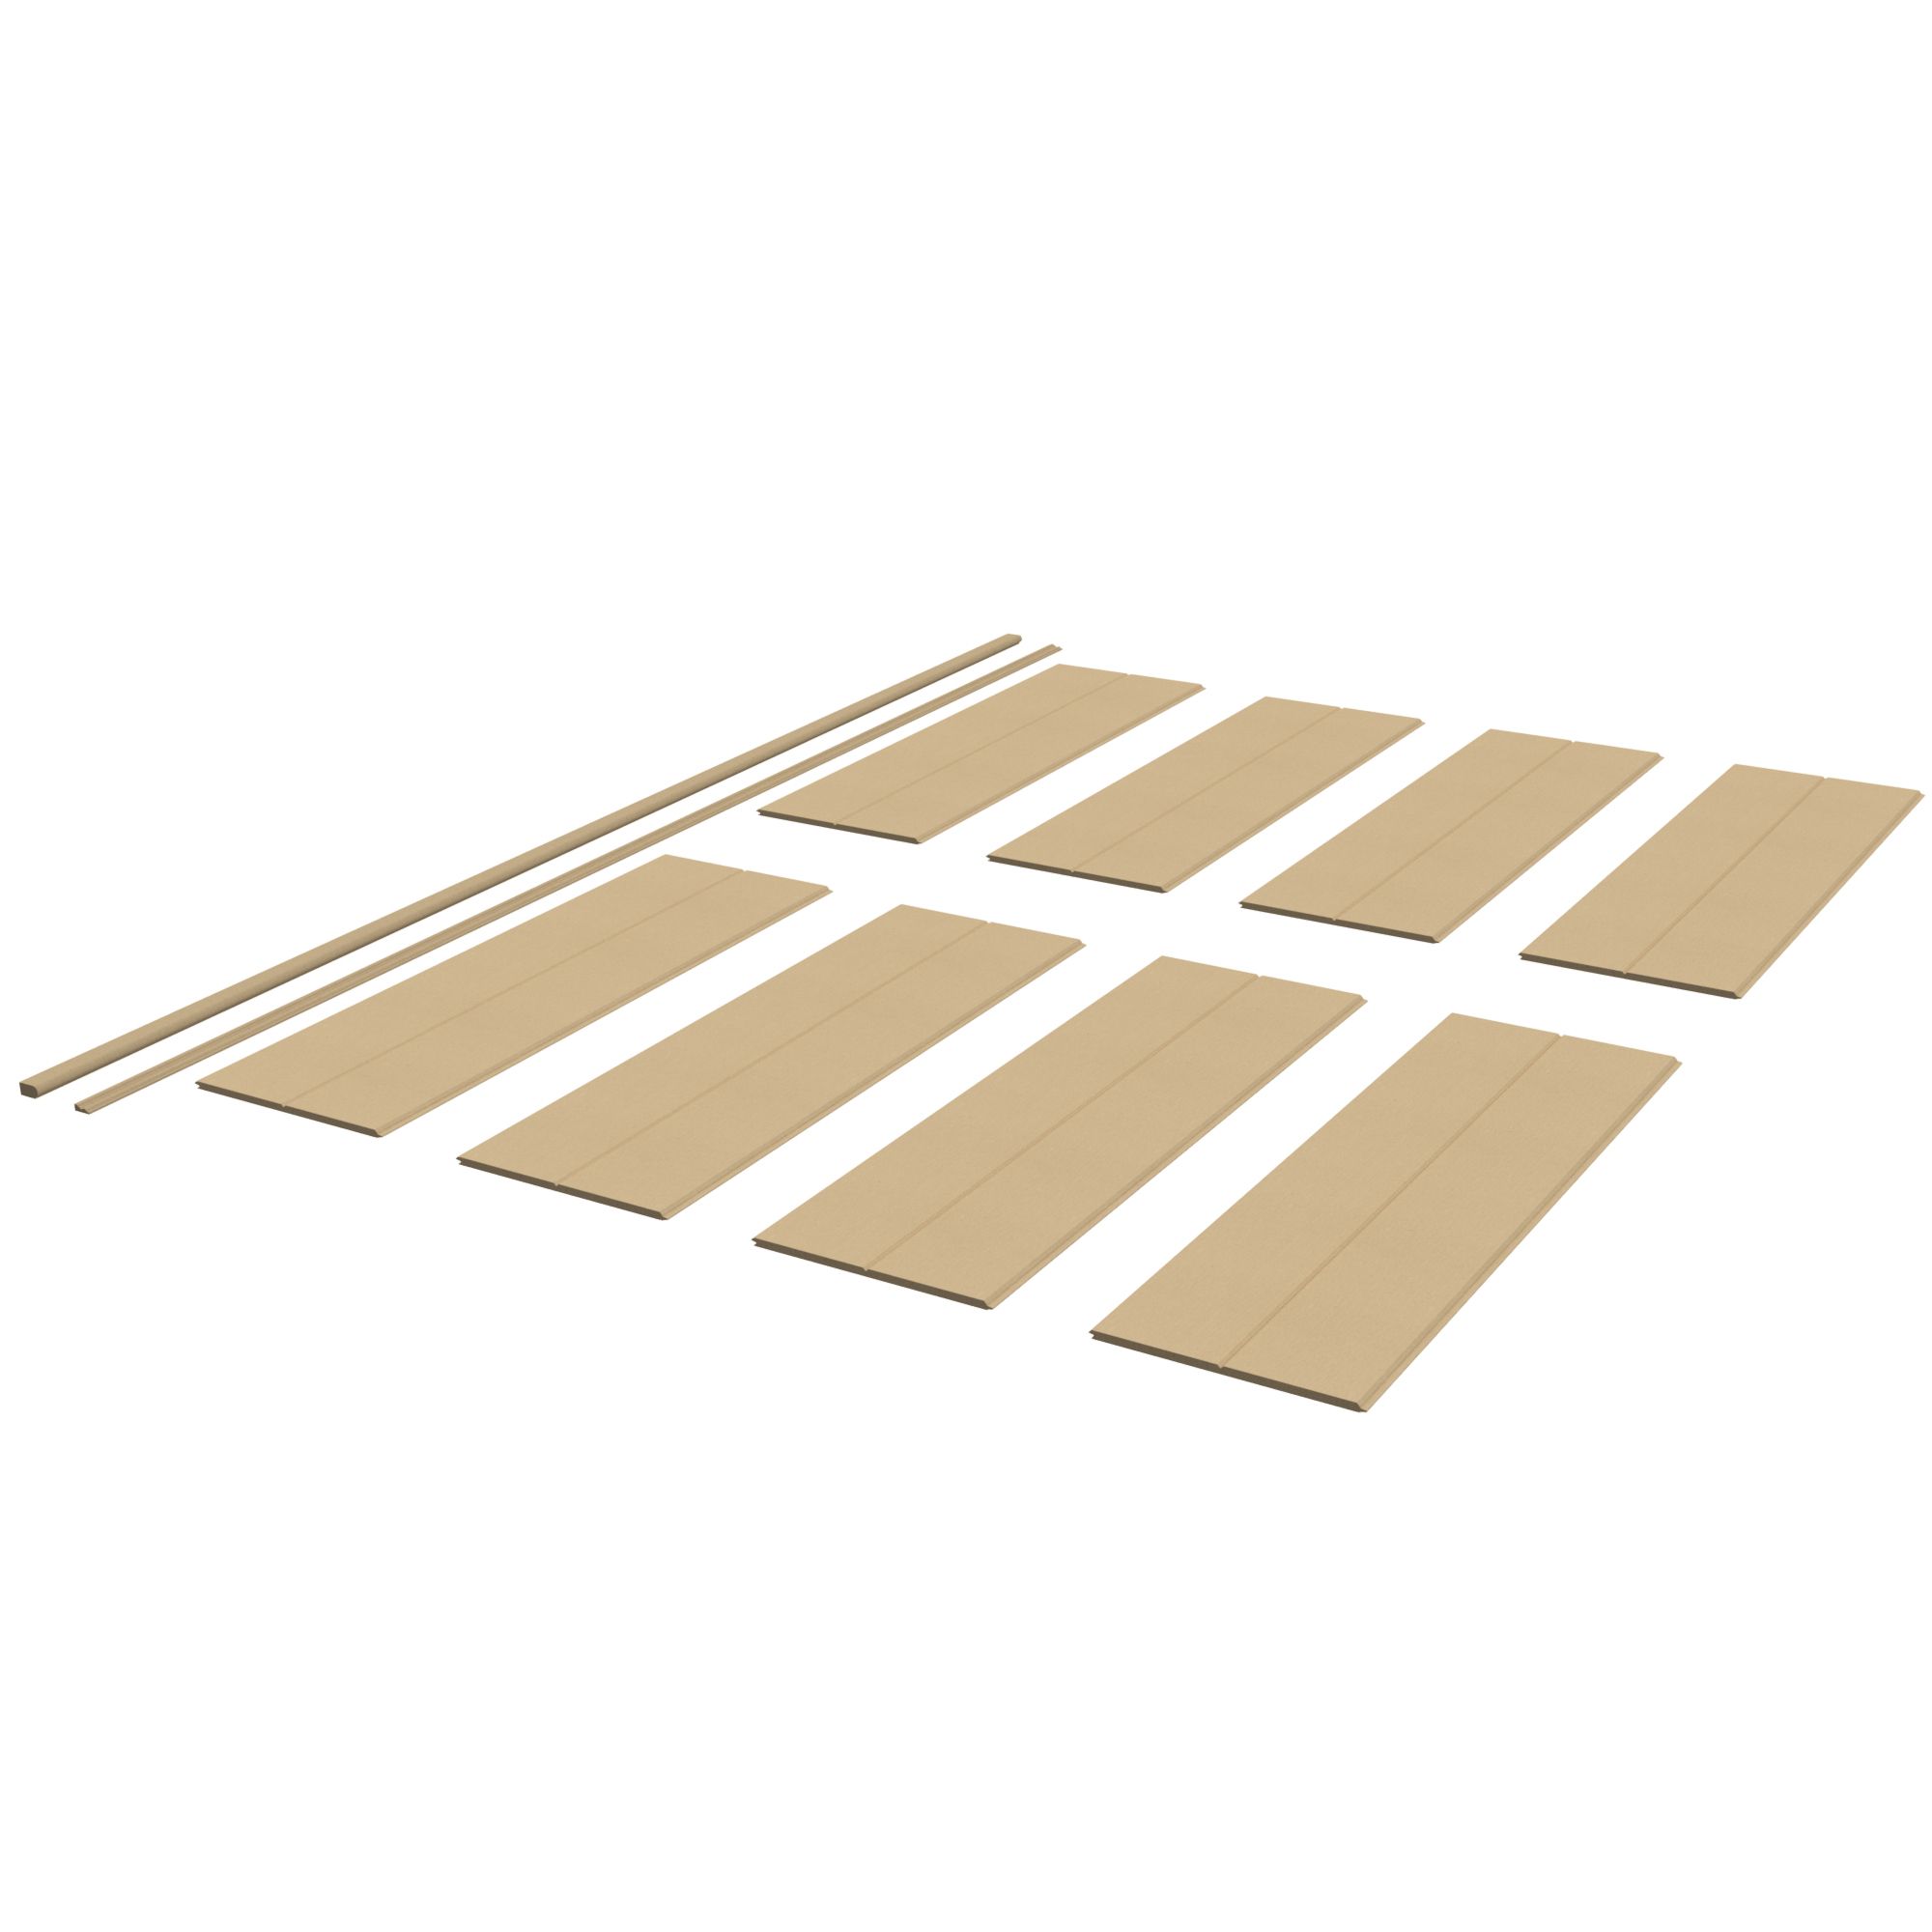 Cheshire Mouldings MDF Wall panelling kit (H)1800mm (W)250mm (T)9mm